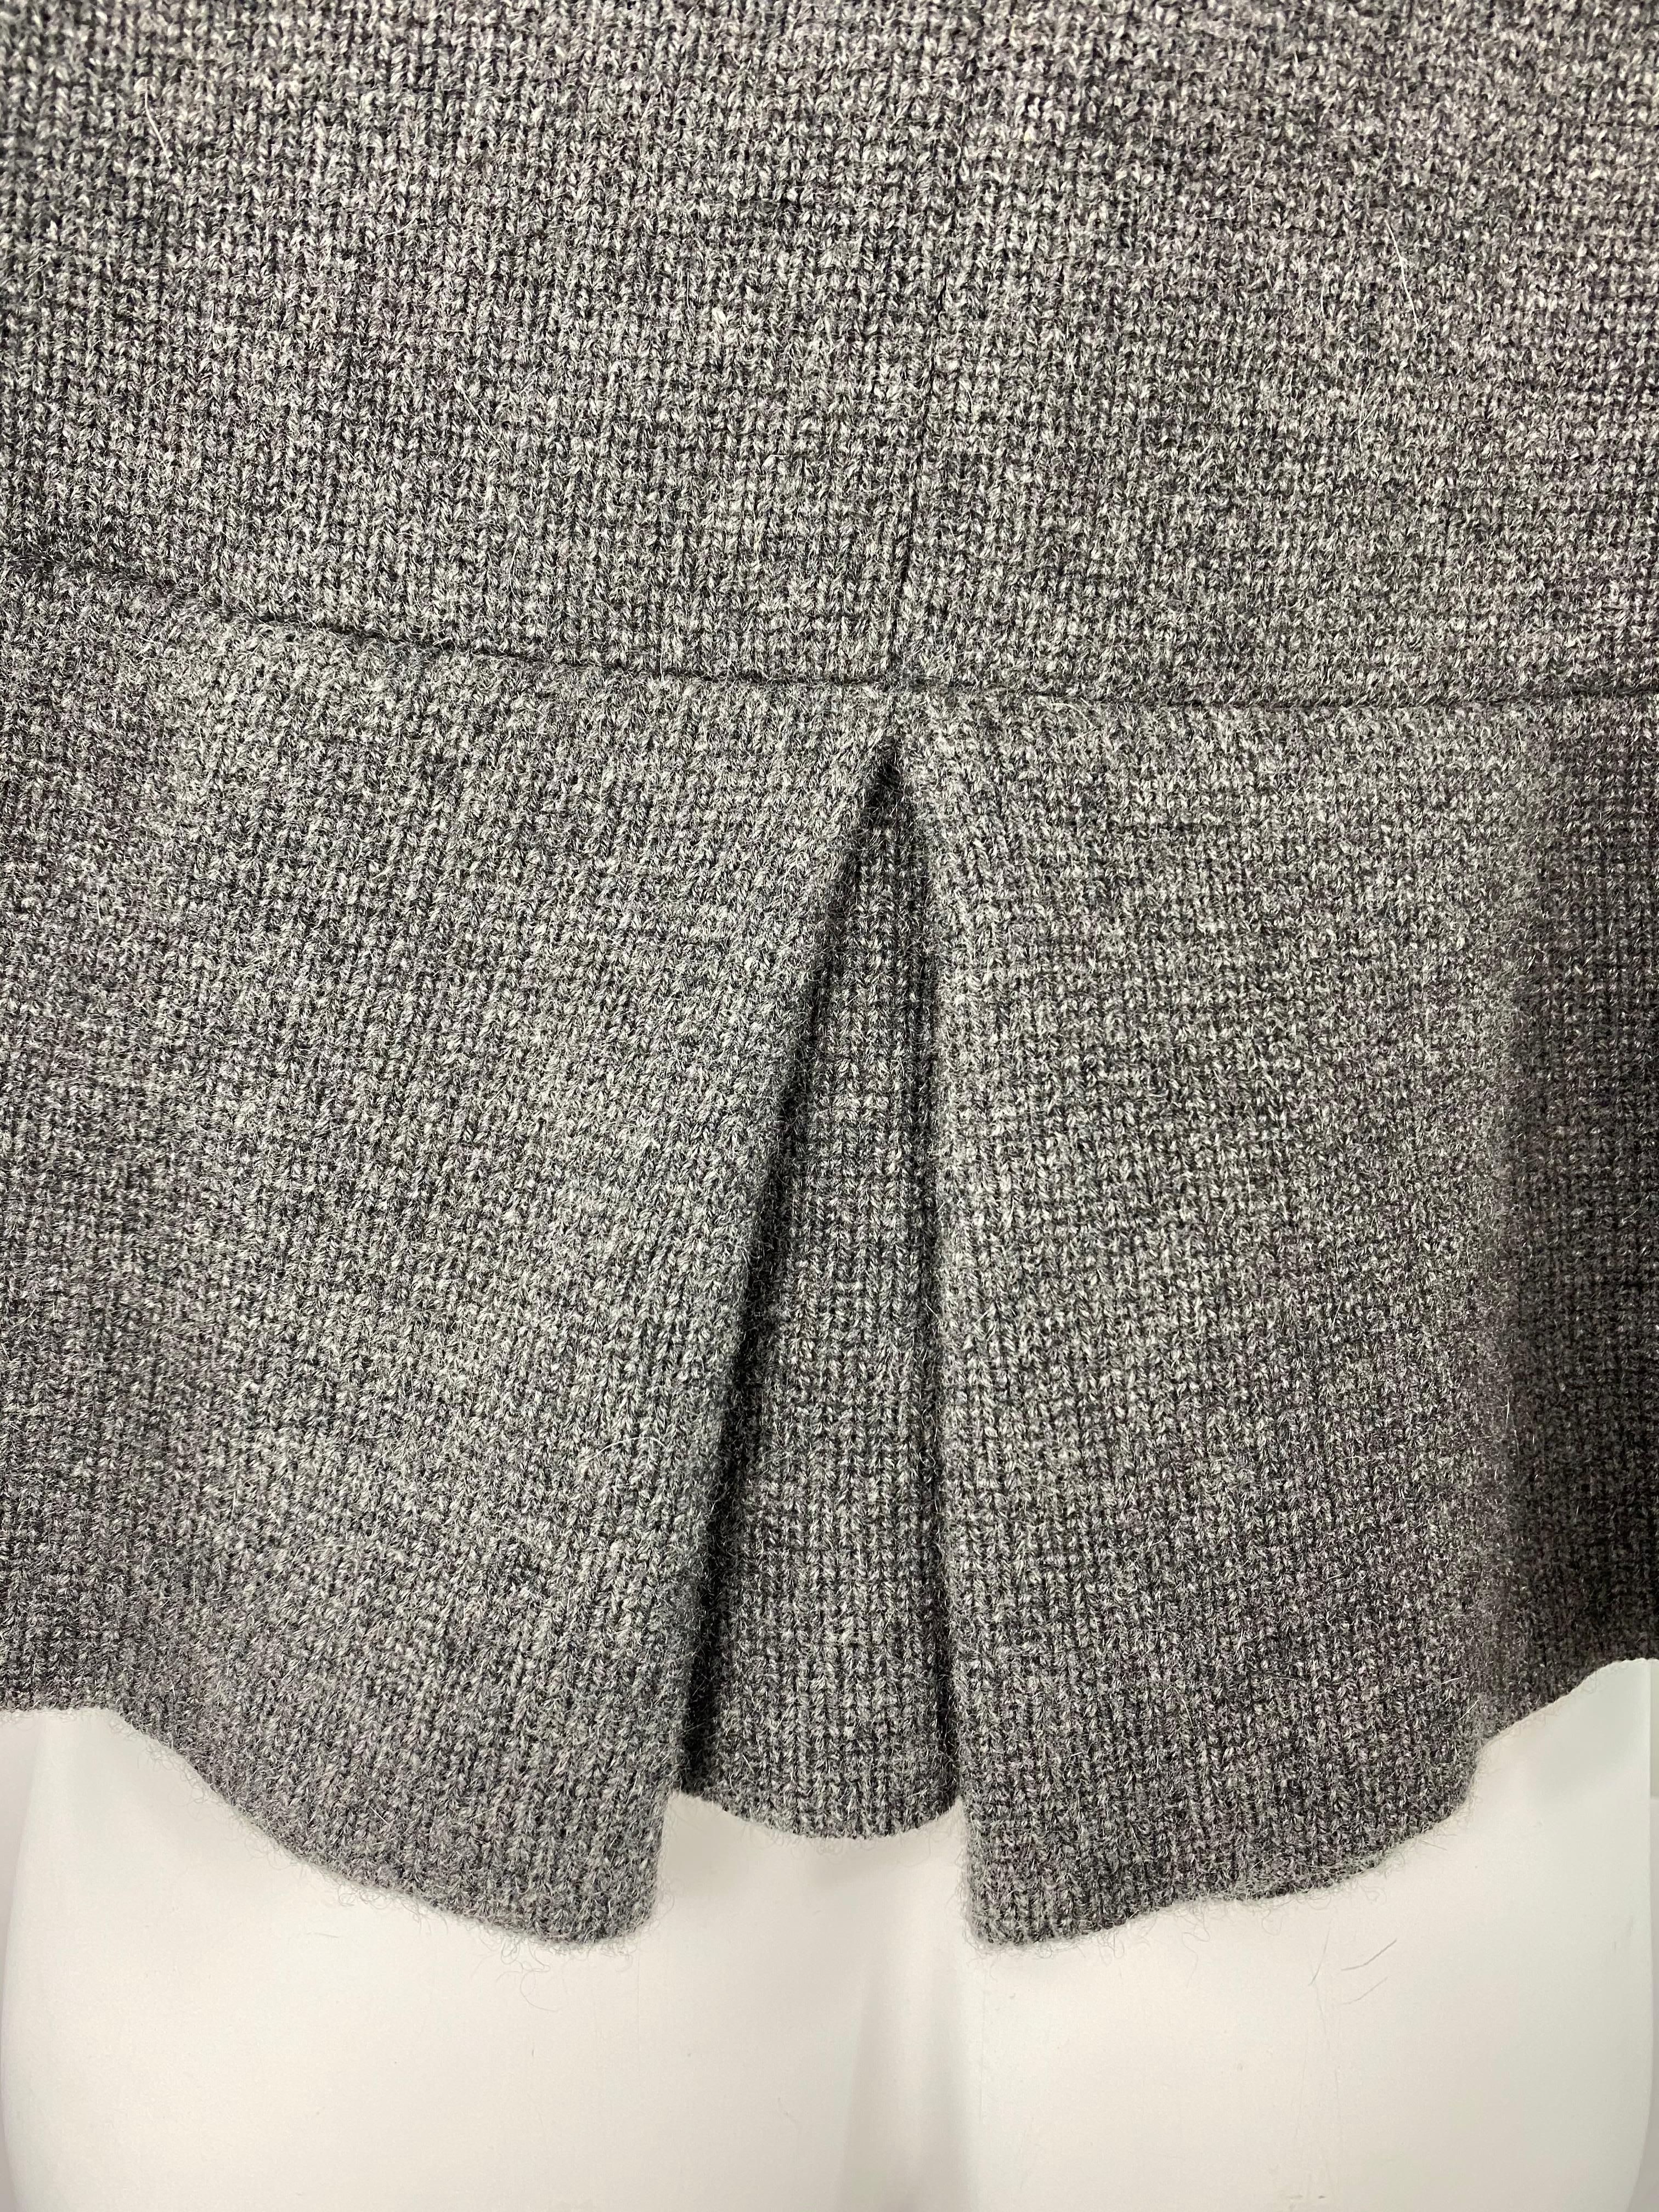 Women's TSE Grey Cashmere Sweater Cardigan Top, Size S/M For Sale